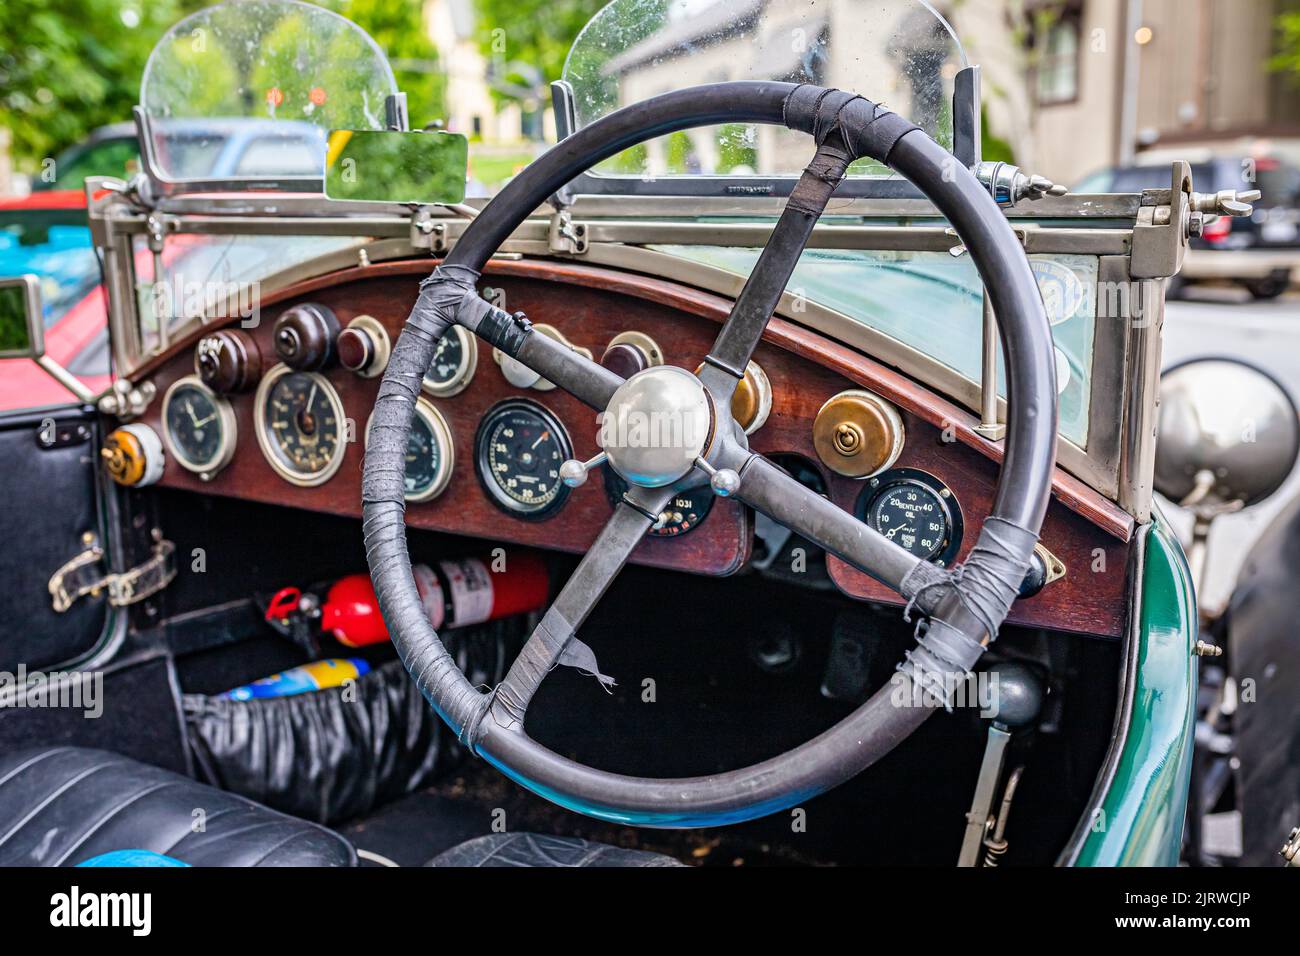 Highlands, NC - June 11, 2022: Close up detailed interior view of a 1927 Bentley 3 Litre Speed Model Tourer at a local car show. Stock Photo